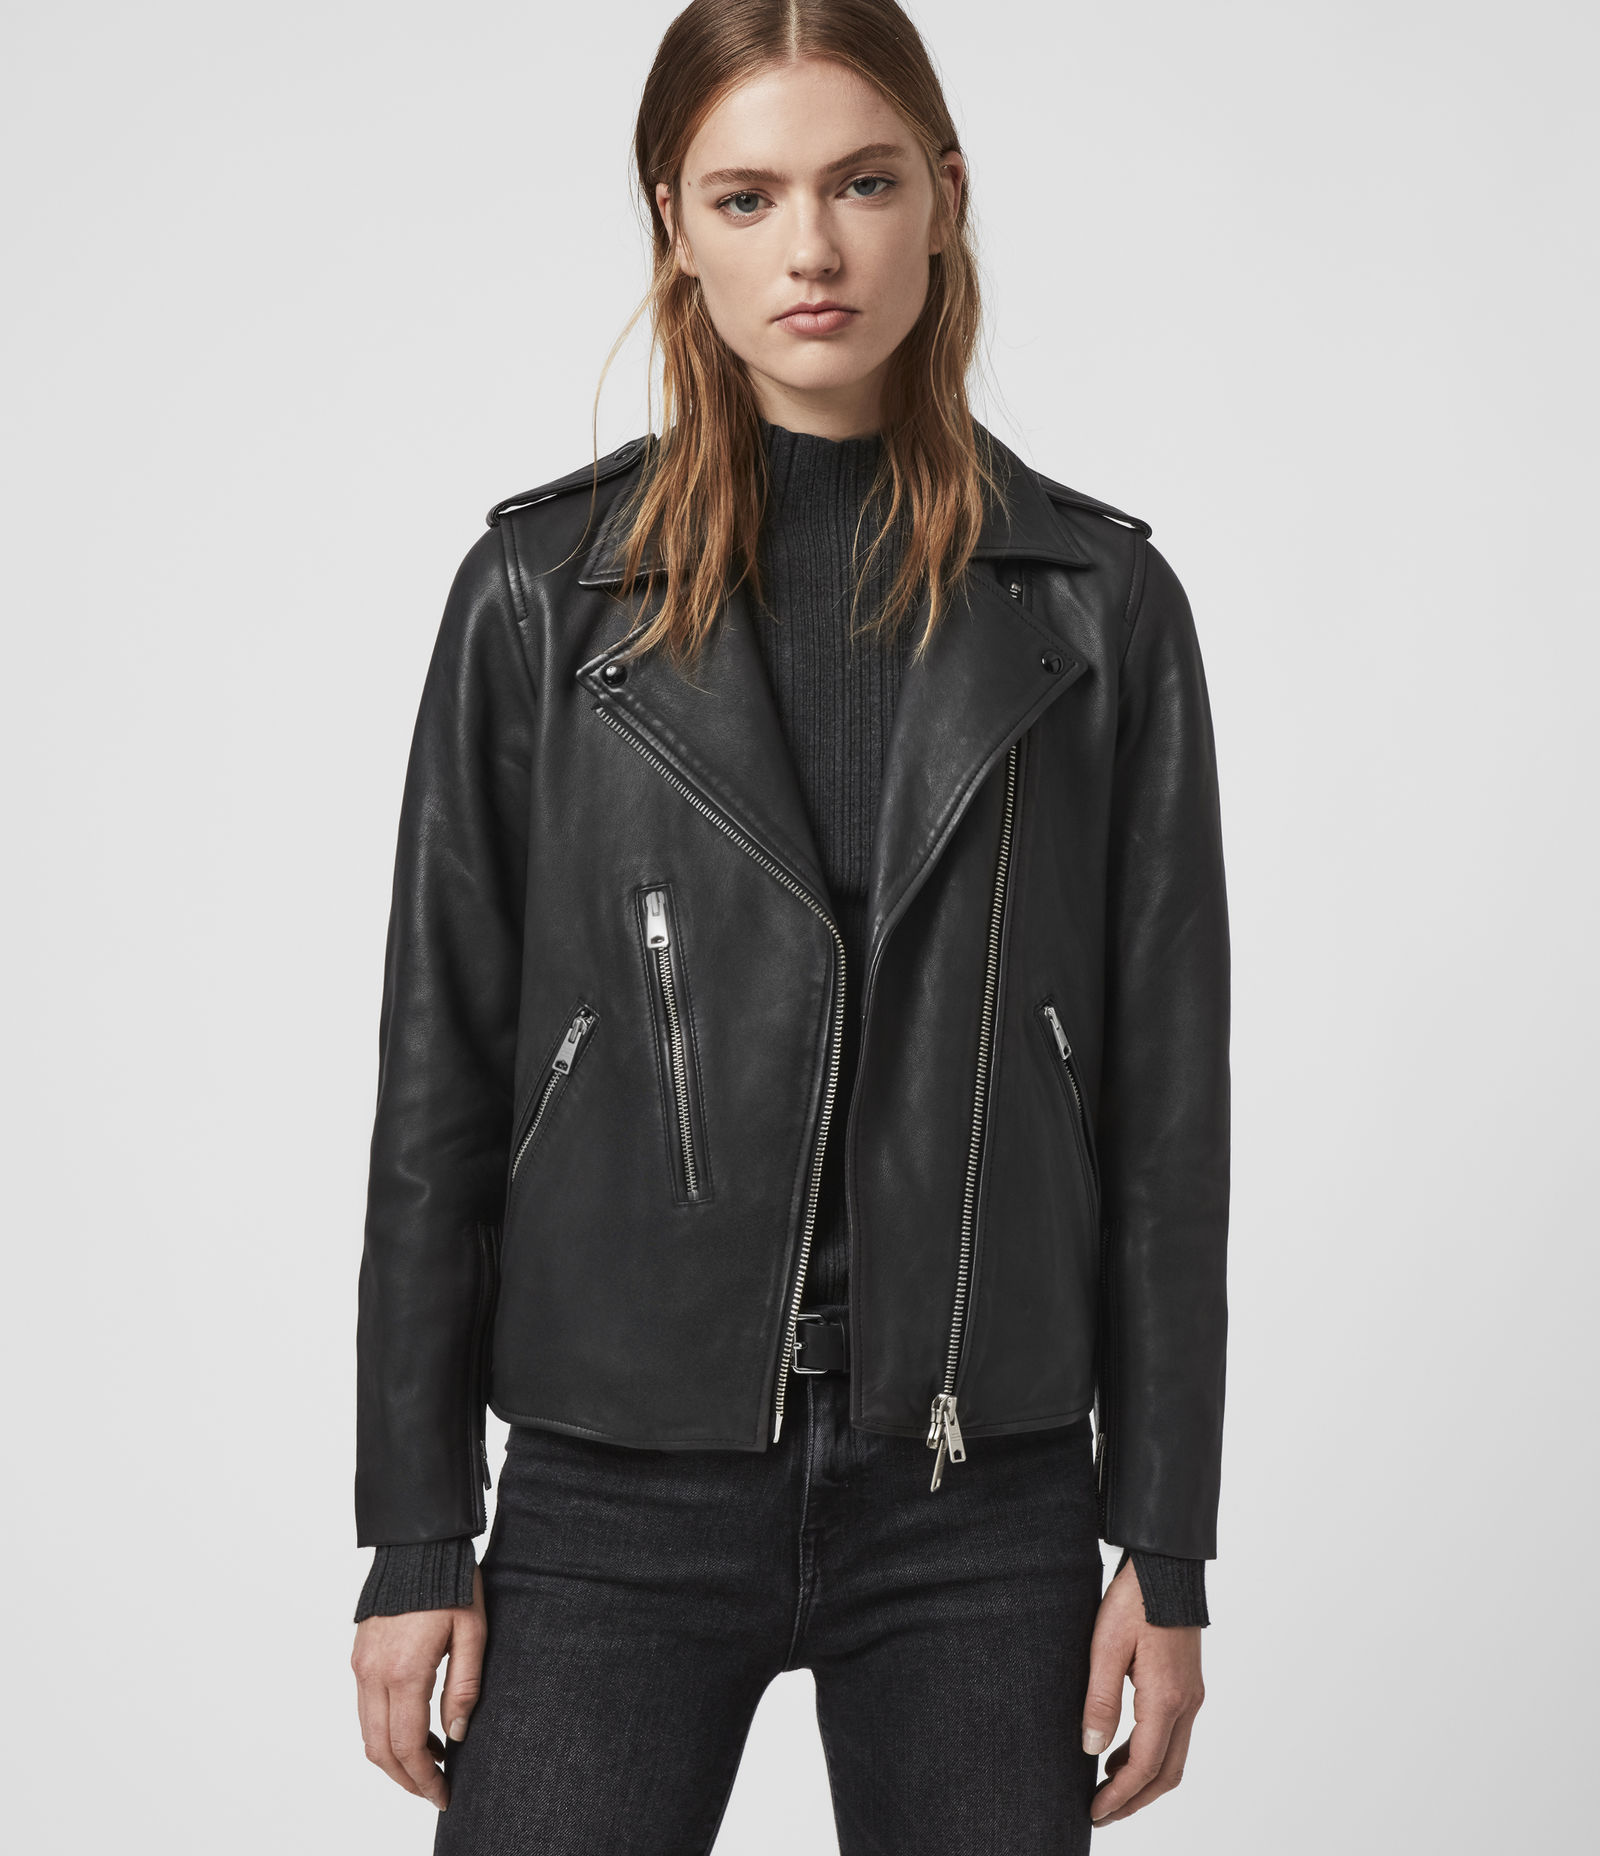 Denim Guide: How To Wear Leather Jackets With Jeans - THE JEANS BLOG